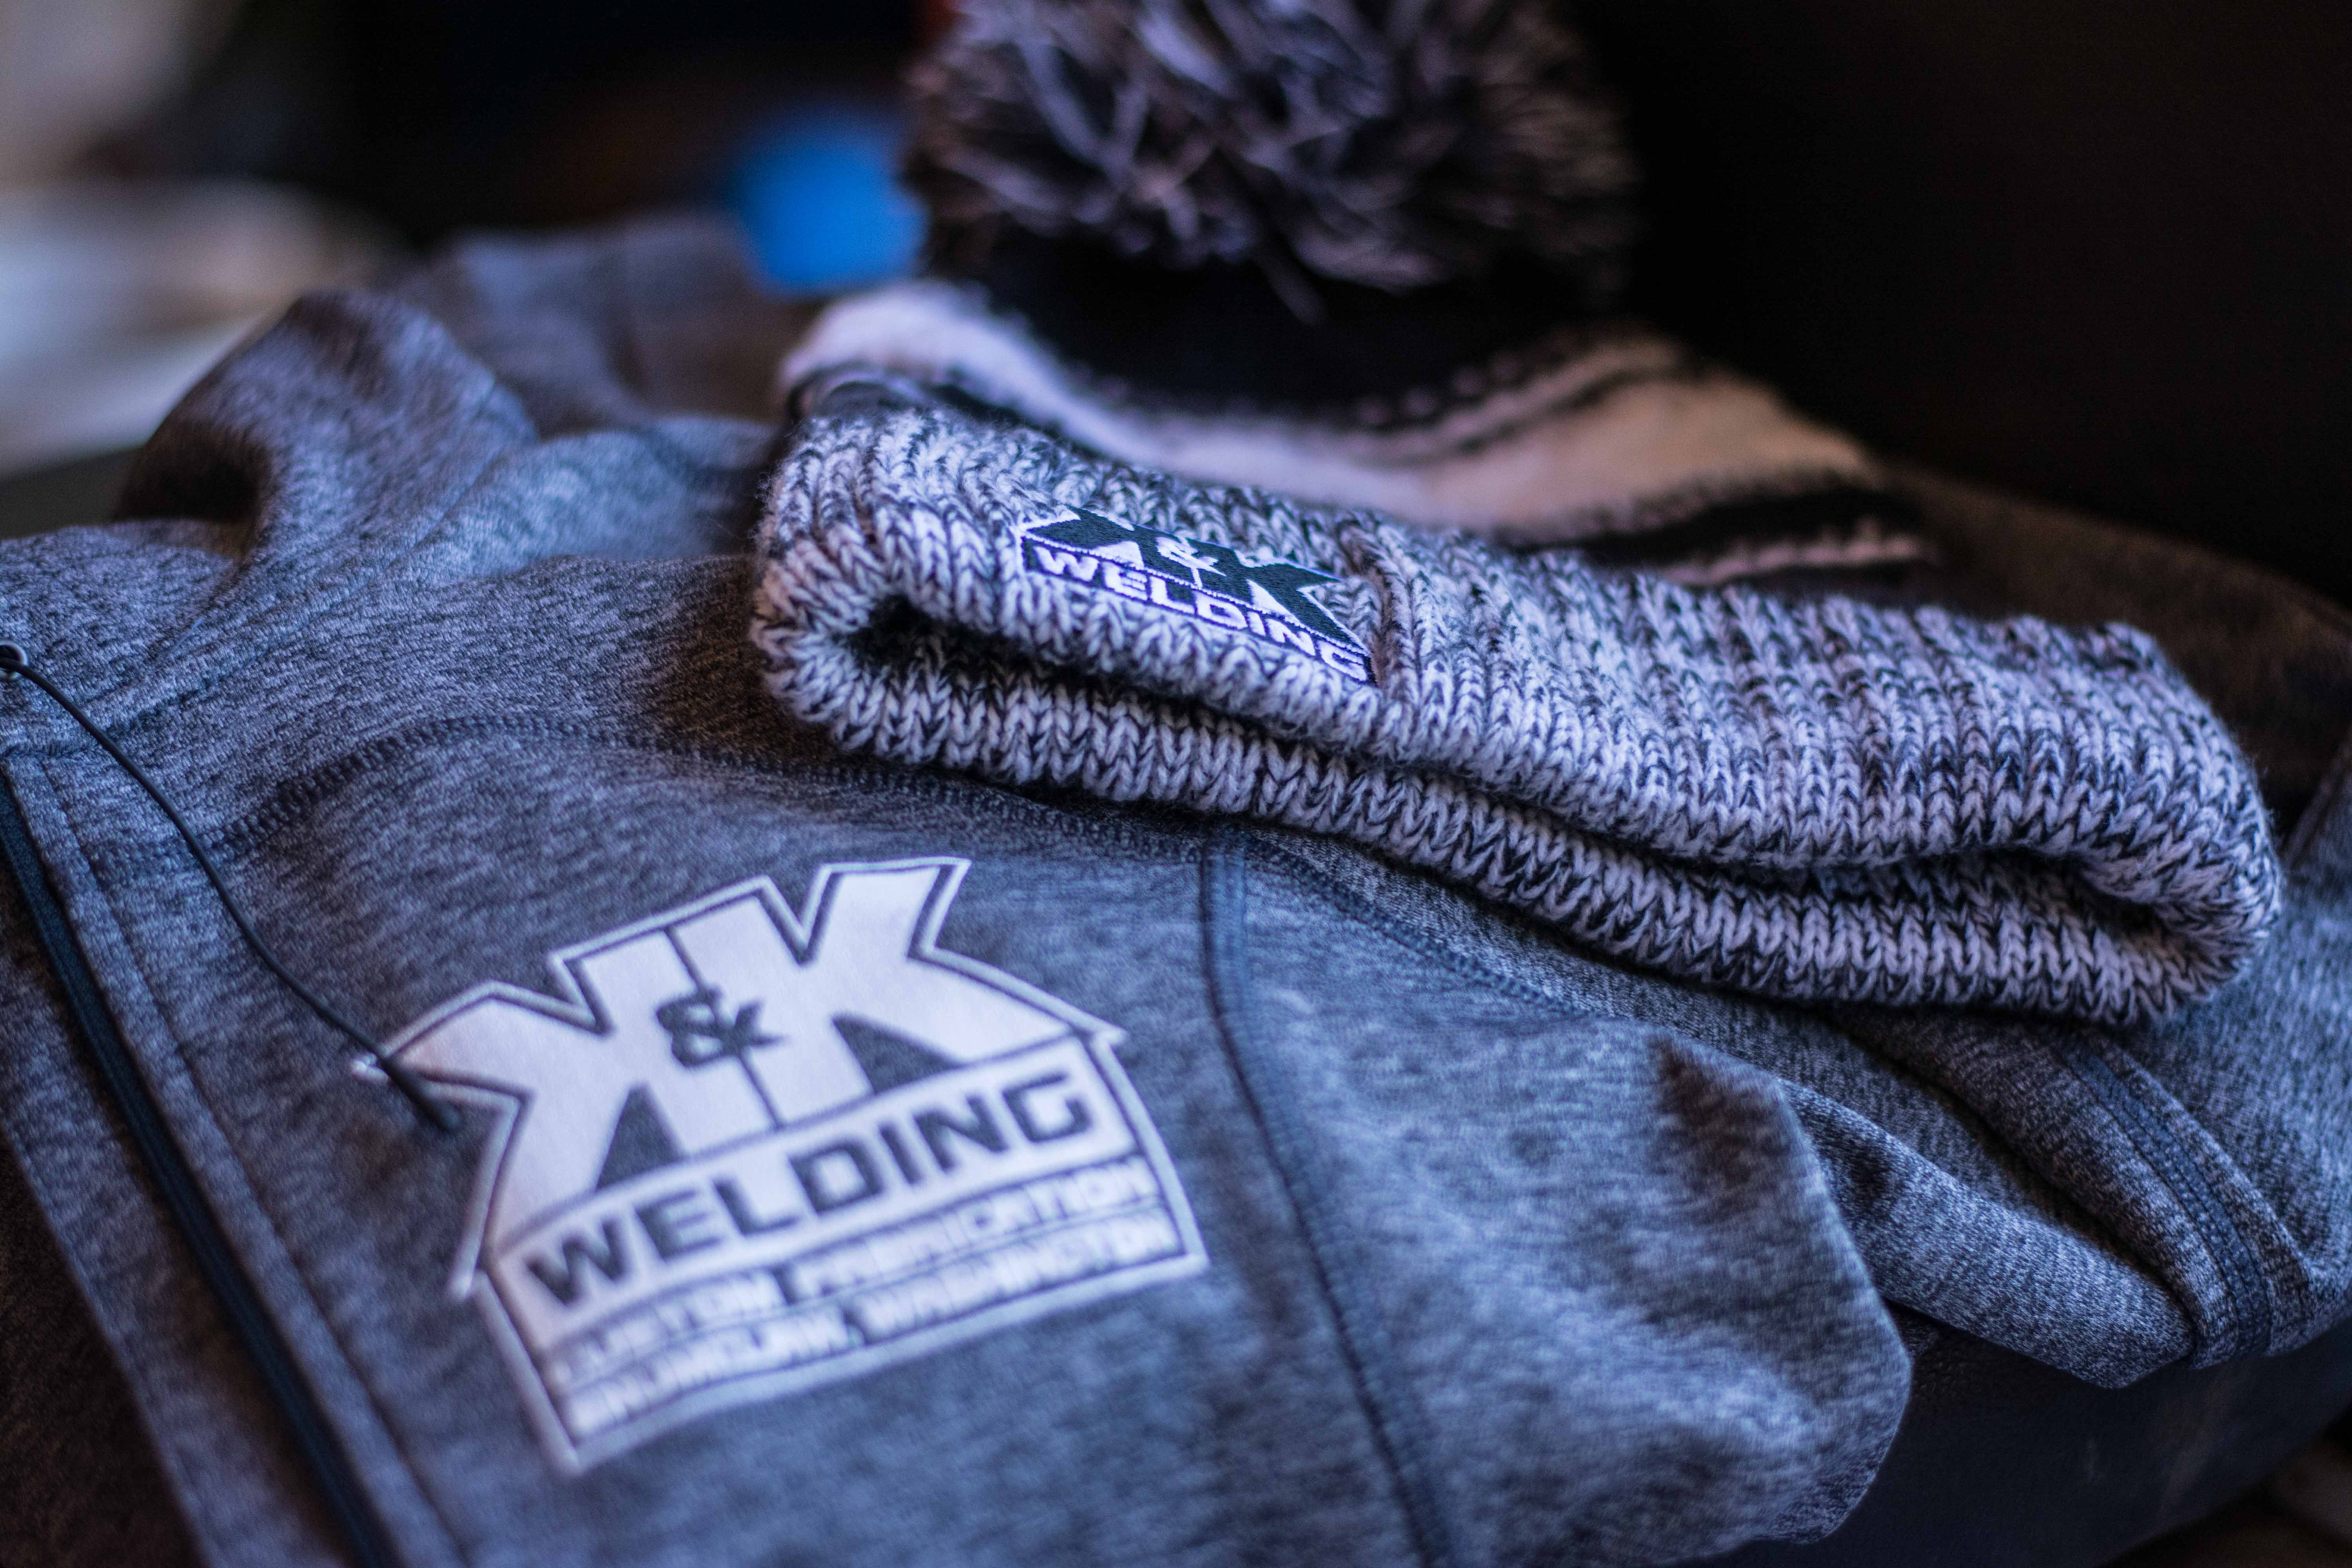   Featured College Hill Client K&K Welding  Custom Design Gear apparel and promotional products beanies welding